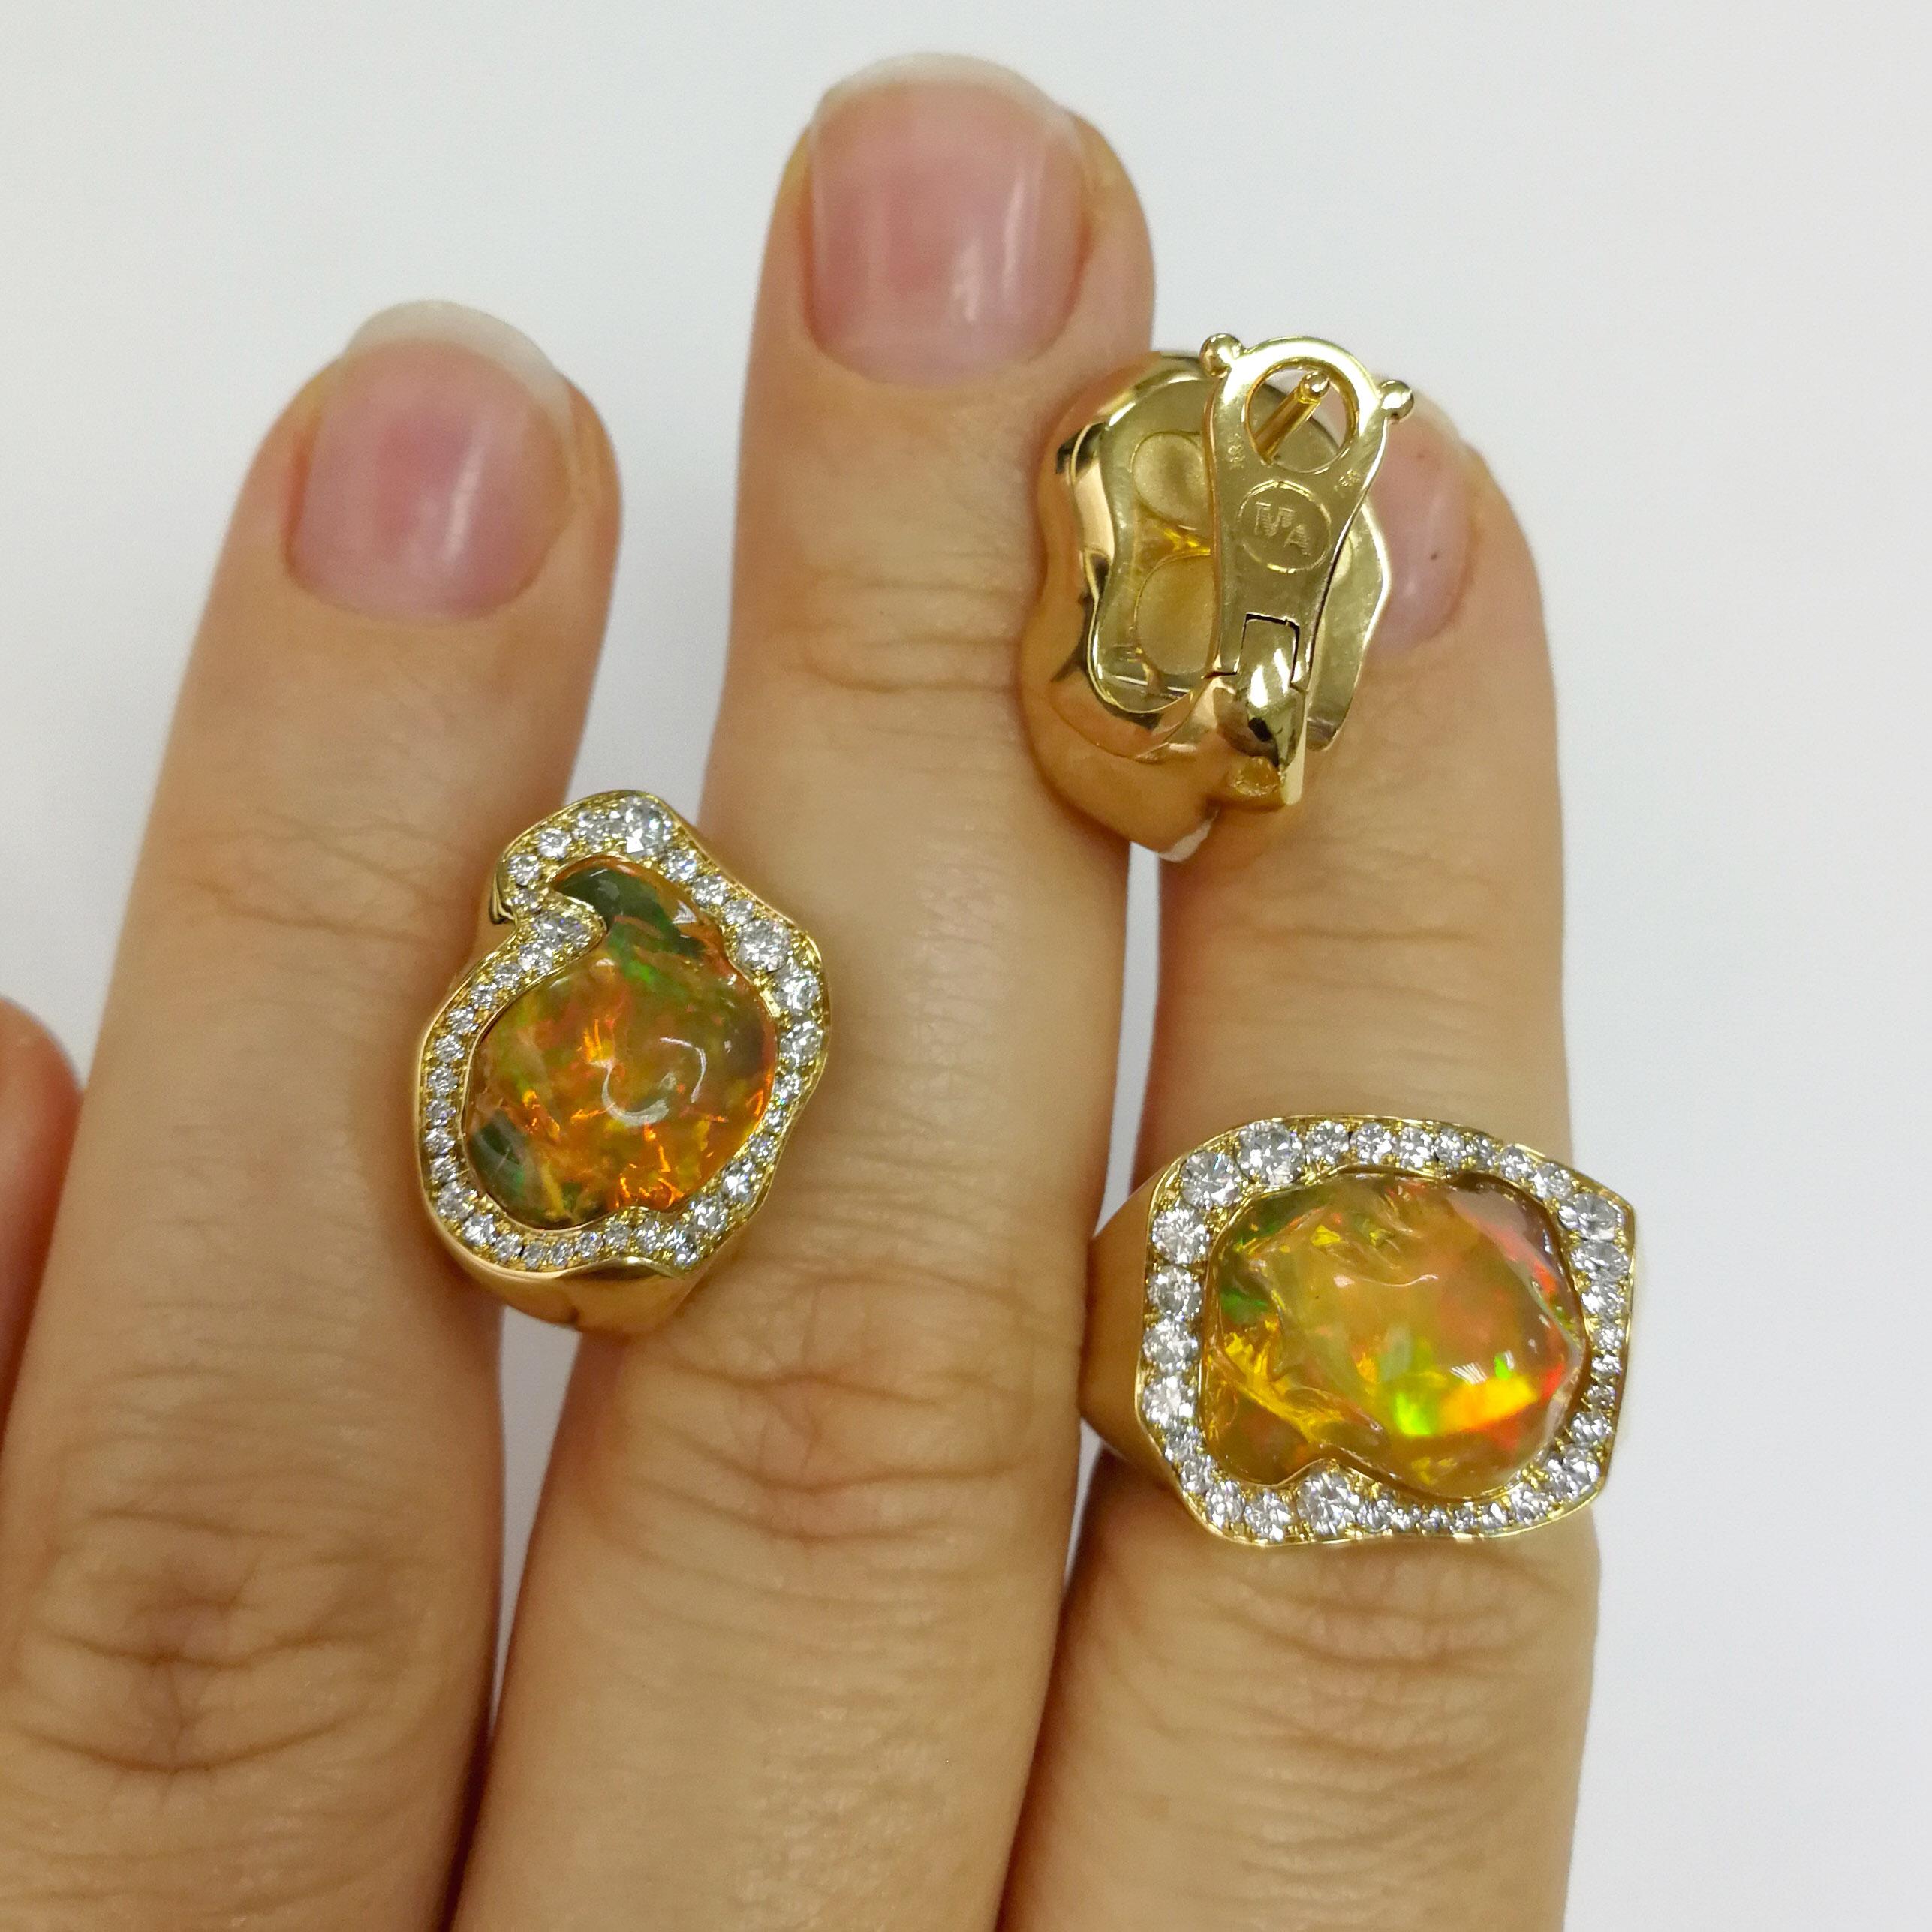 Mexican Opal Diamonds One of a Kind 18 Karat Yellow Gold Suite 1